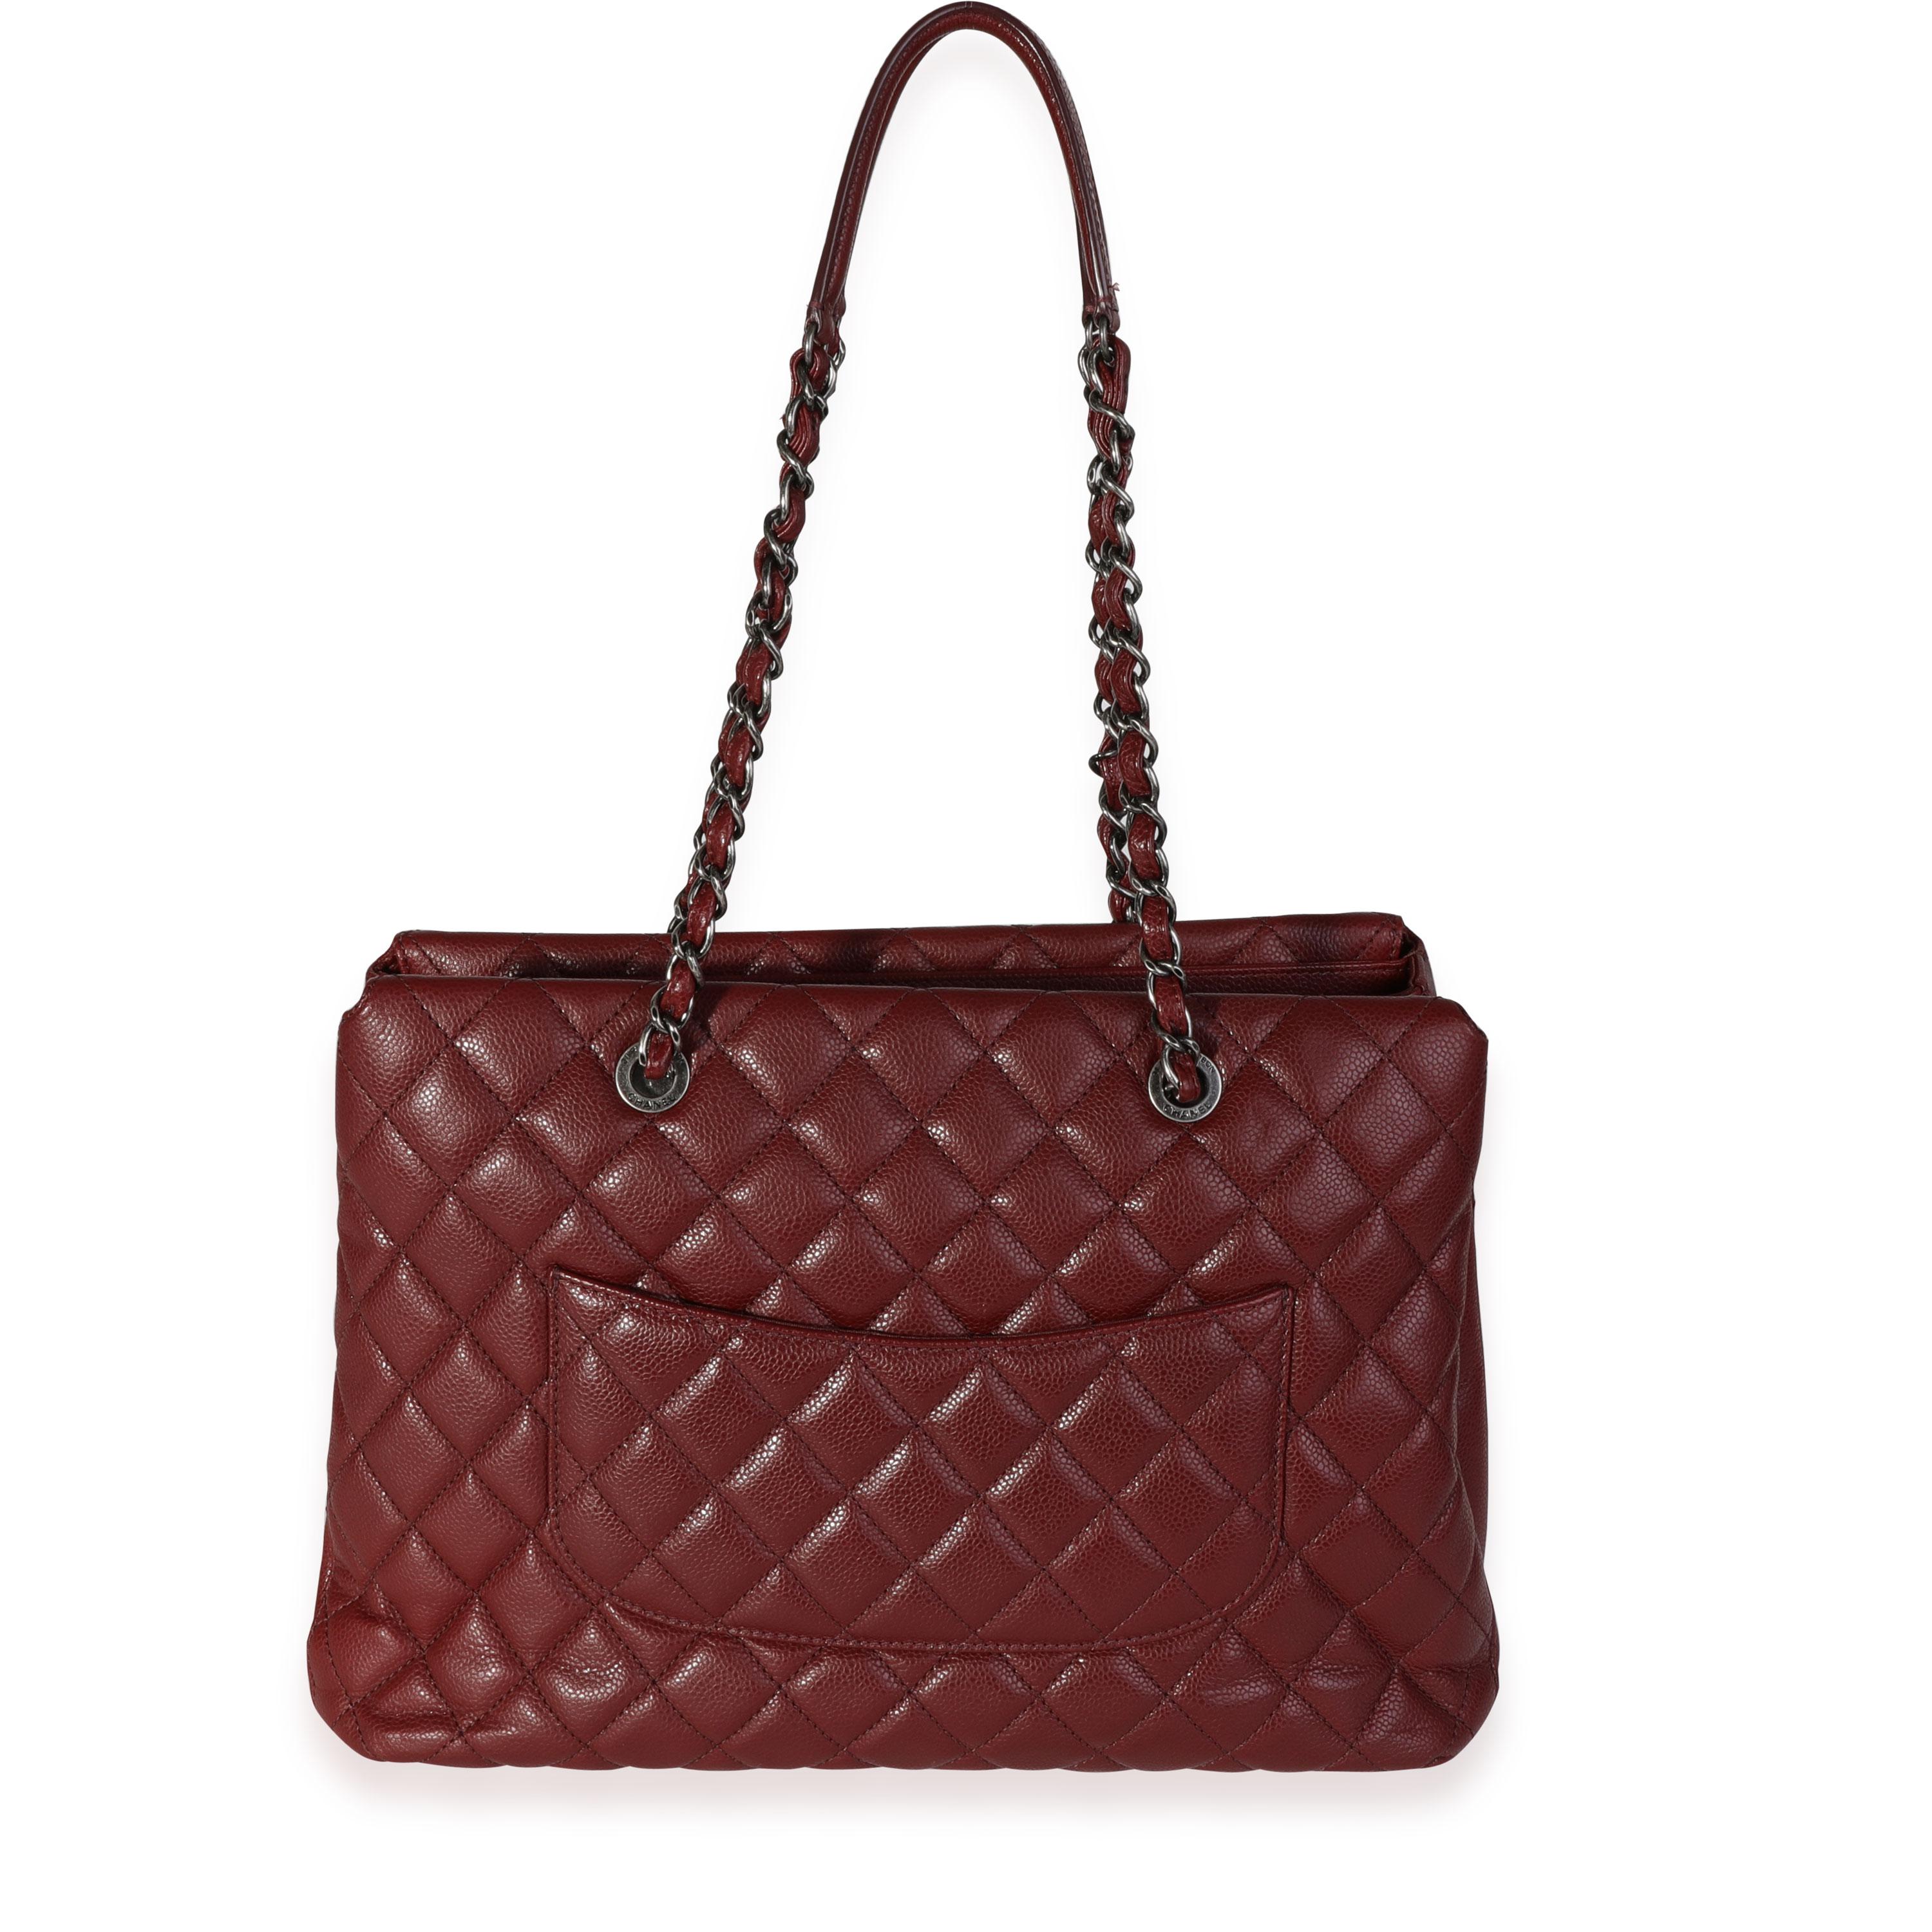 Listing Title: Chanel Dark Red Quilted Caviar City Shopping Tote
SKU: 118099
MSRP: 3500.00
Condition: Pre-owned (3000)
Handbag Condition: Excellent
Condition Comments: Excellent Condition. Light wear to corners. No other visible signs of